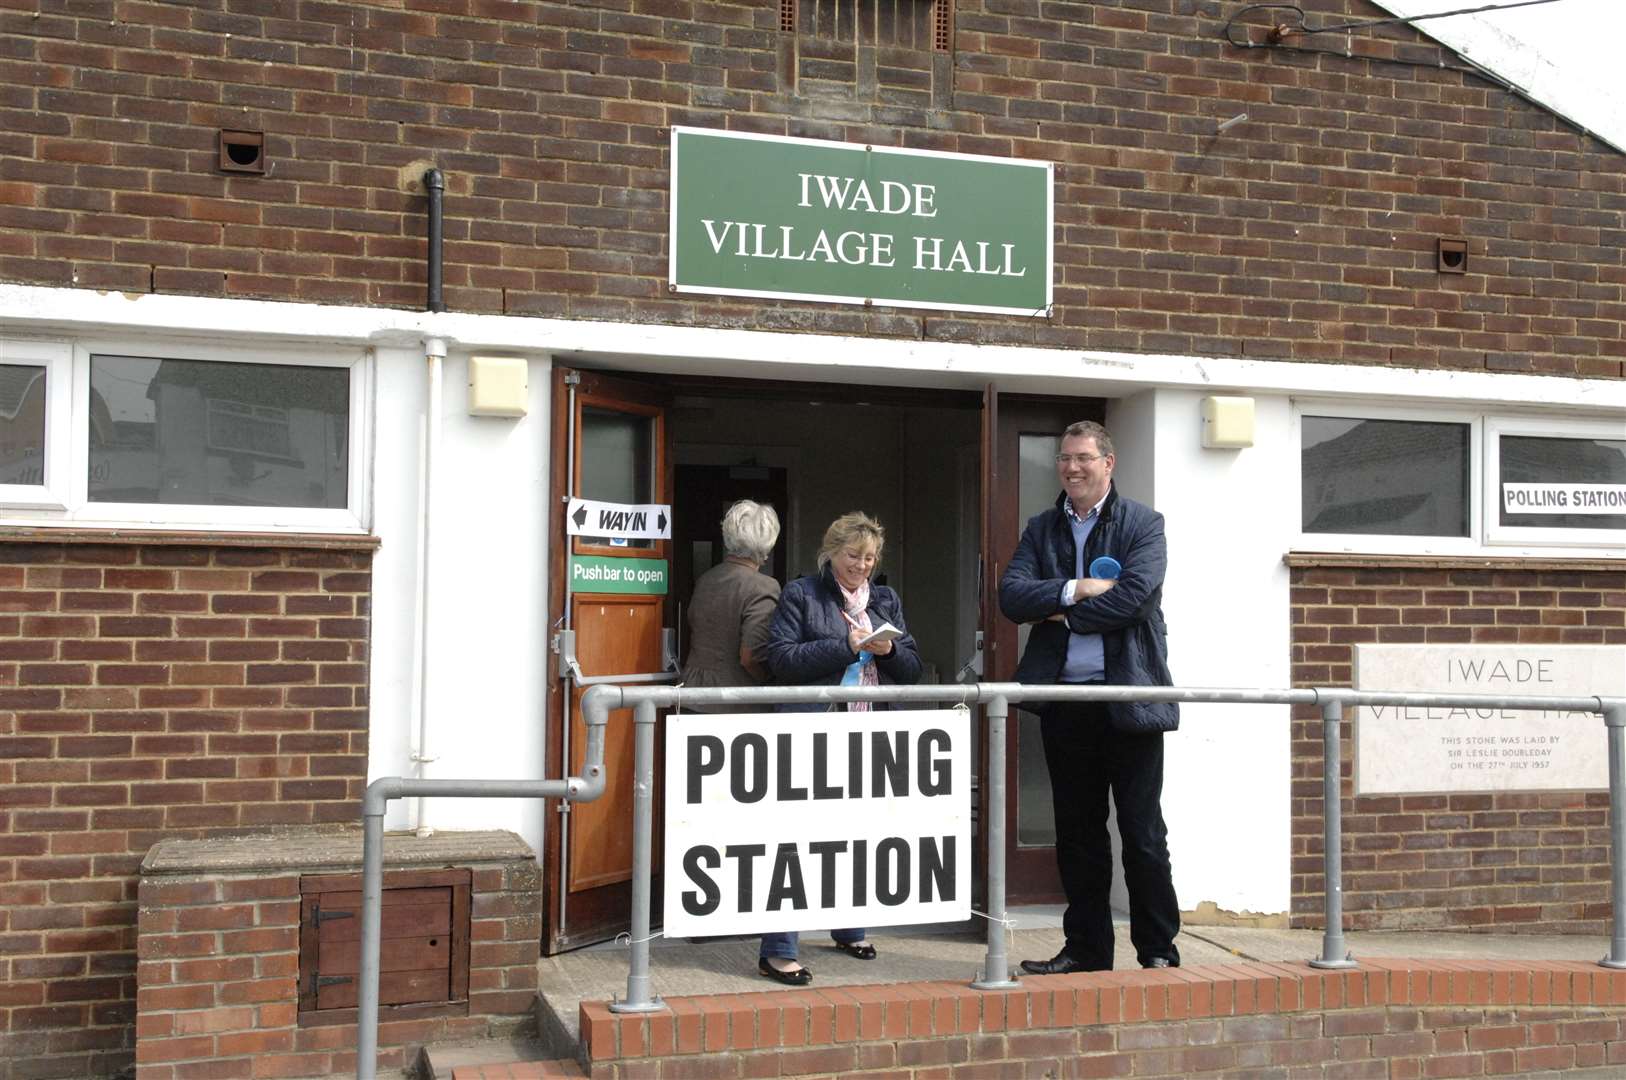 Iwade Village Hall, in Ferry Road, is used as a polling station